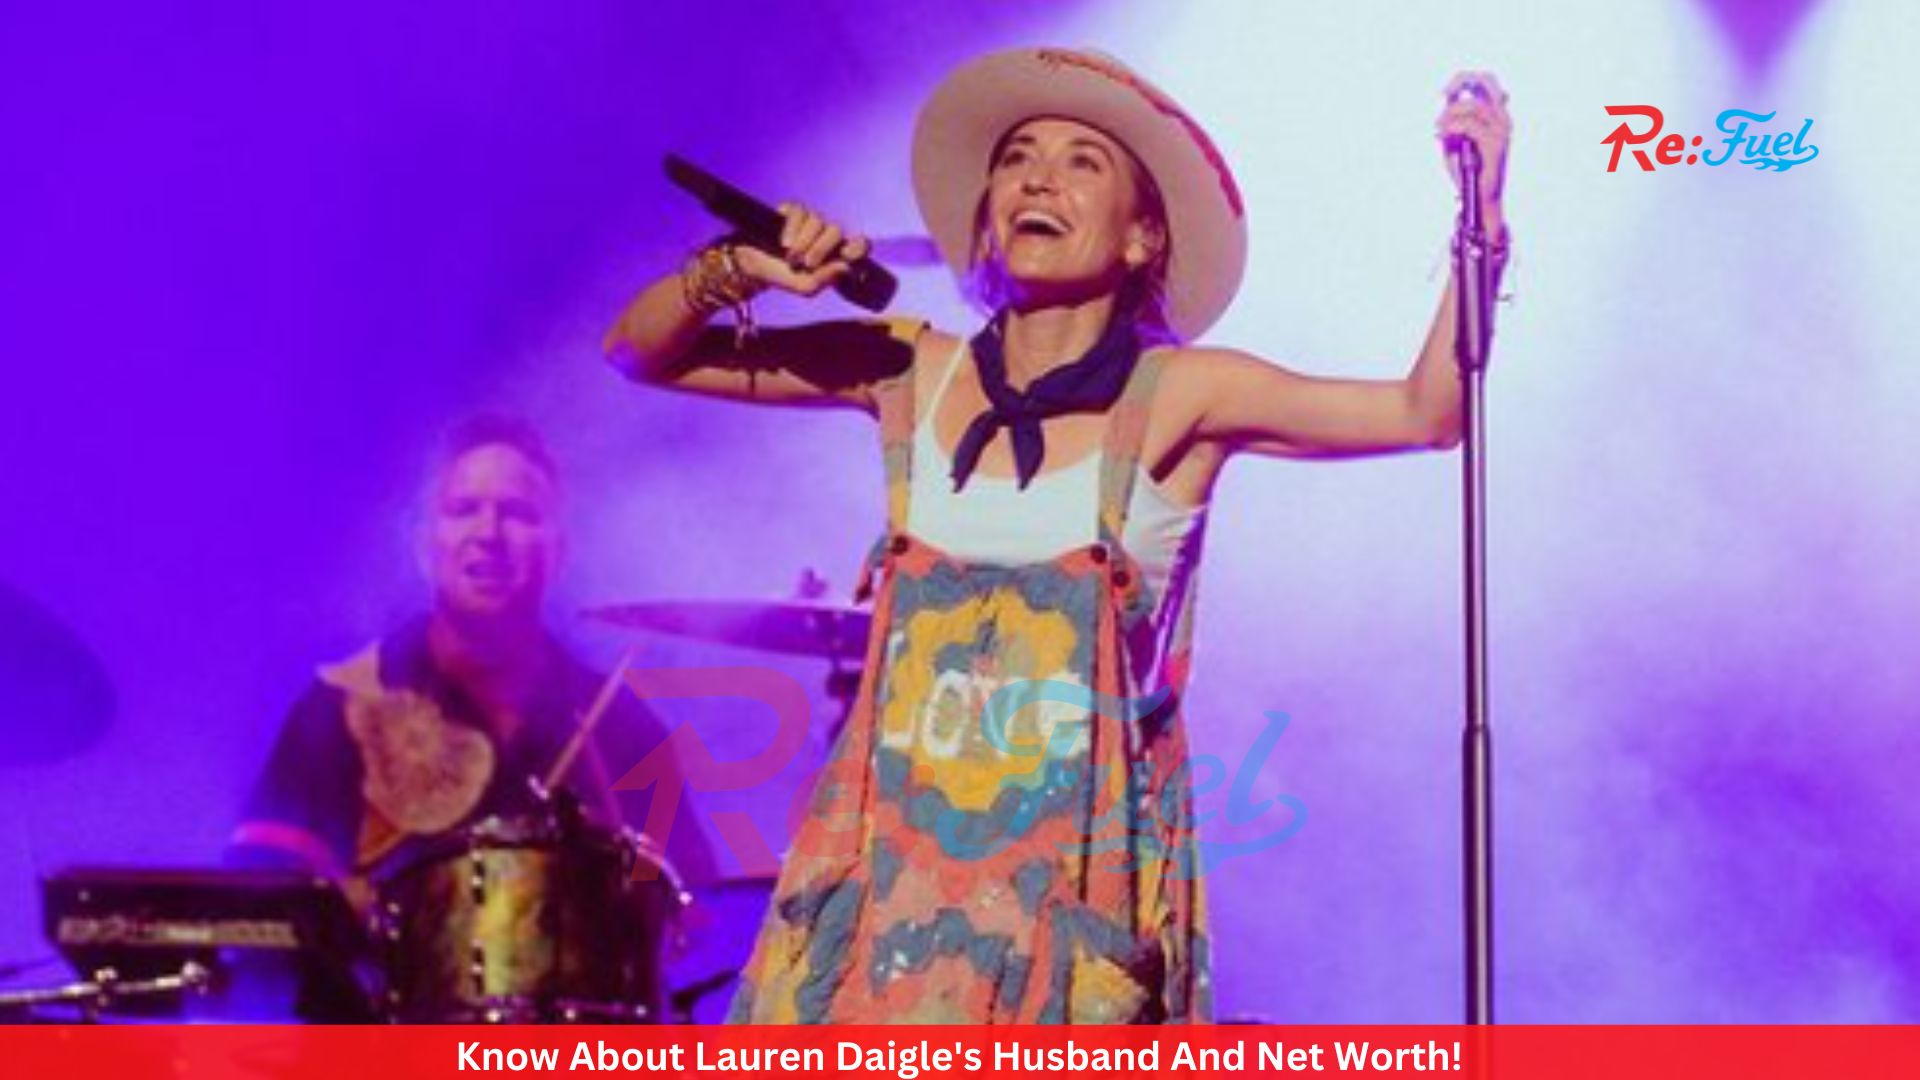 Know About Lauren Daigle's Husband And Net Worth!